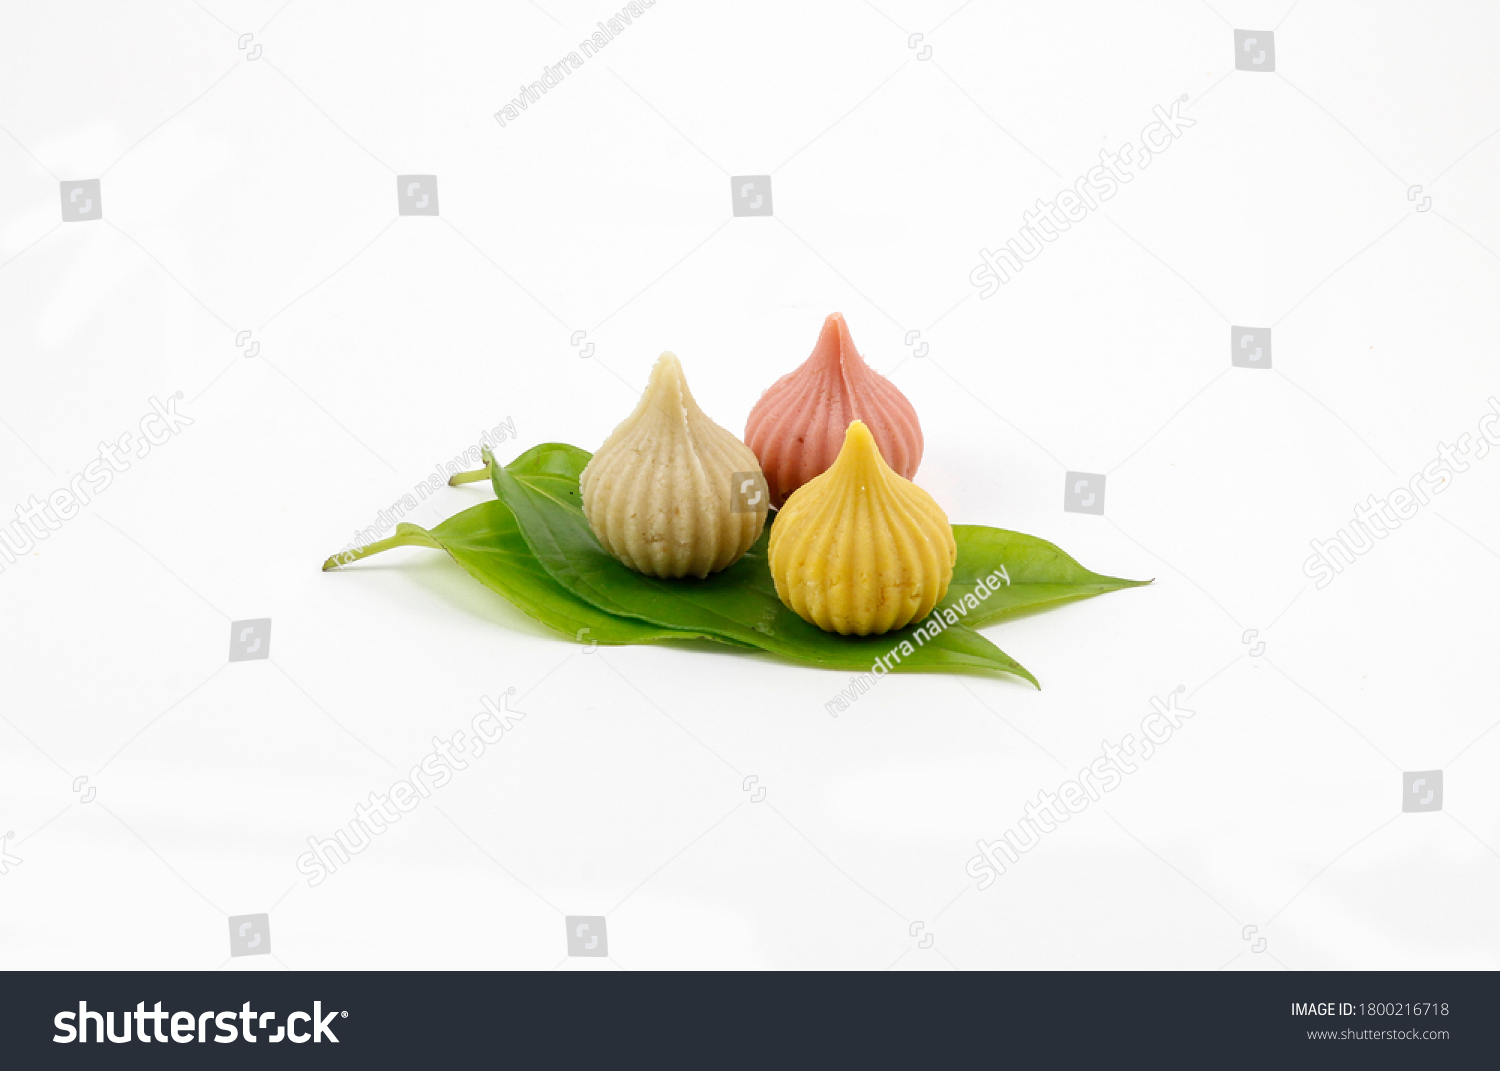 Modak made from khoa is an Indian sweet dumpling offered to Lord Ganapati on Ganesh Chaturthi Festival. variation of modak is prepared Served in a plate. Selective focus #1800216718